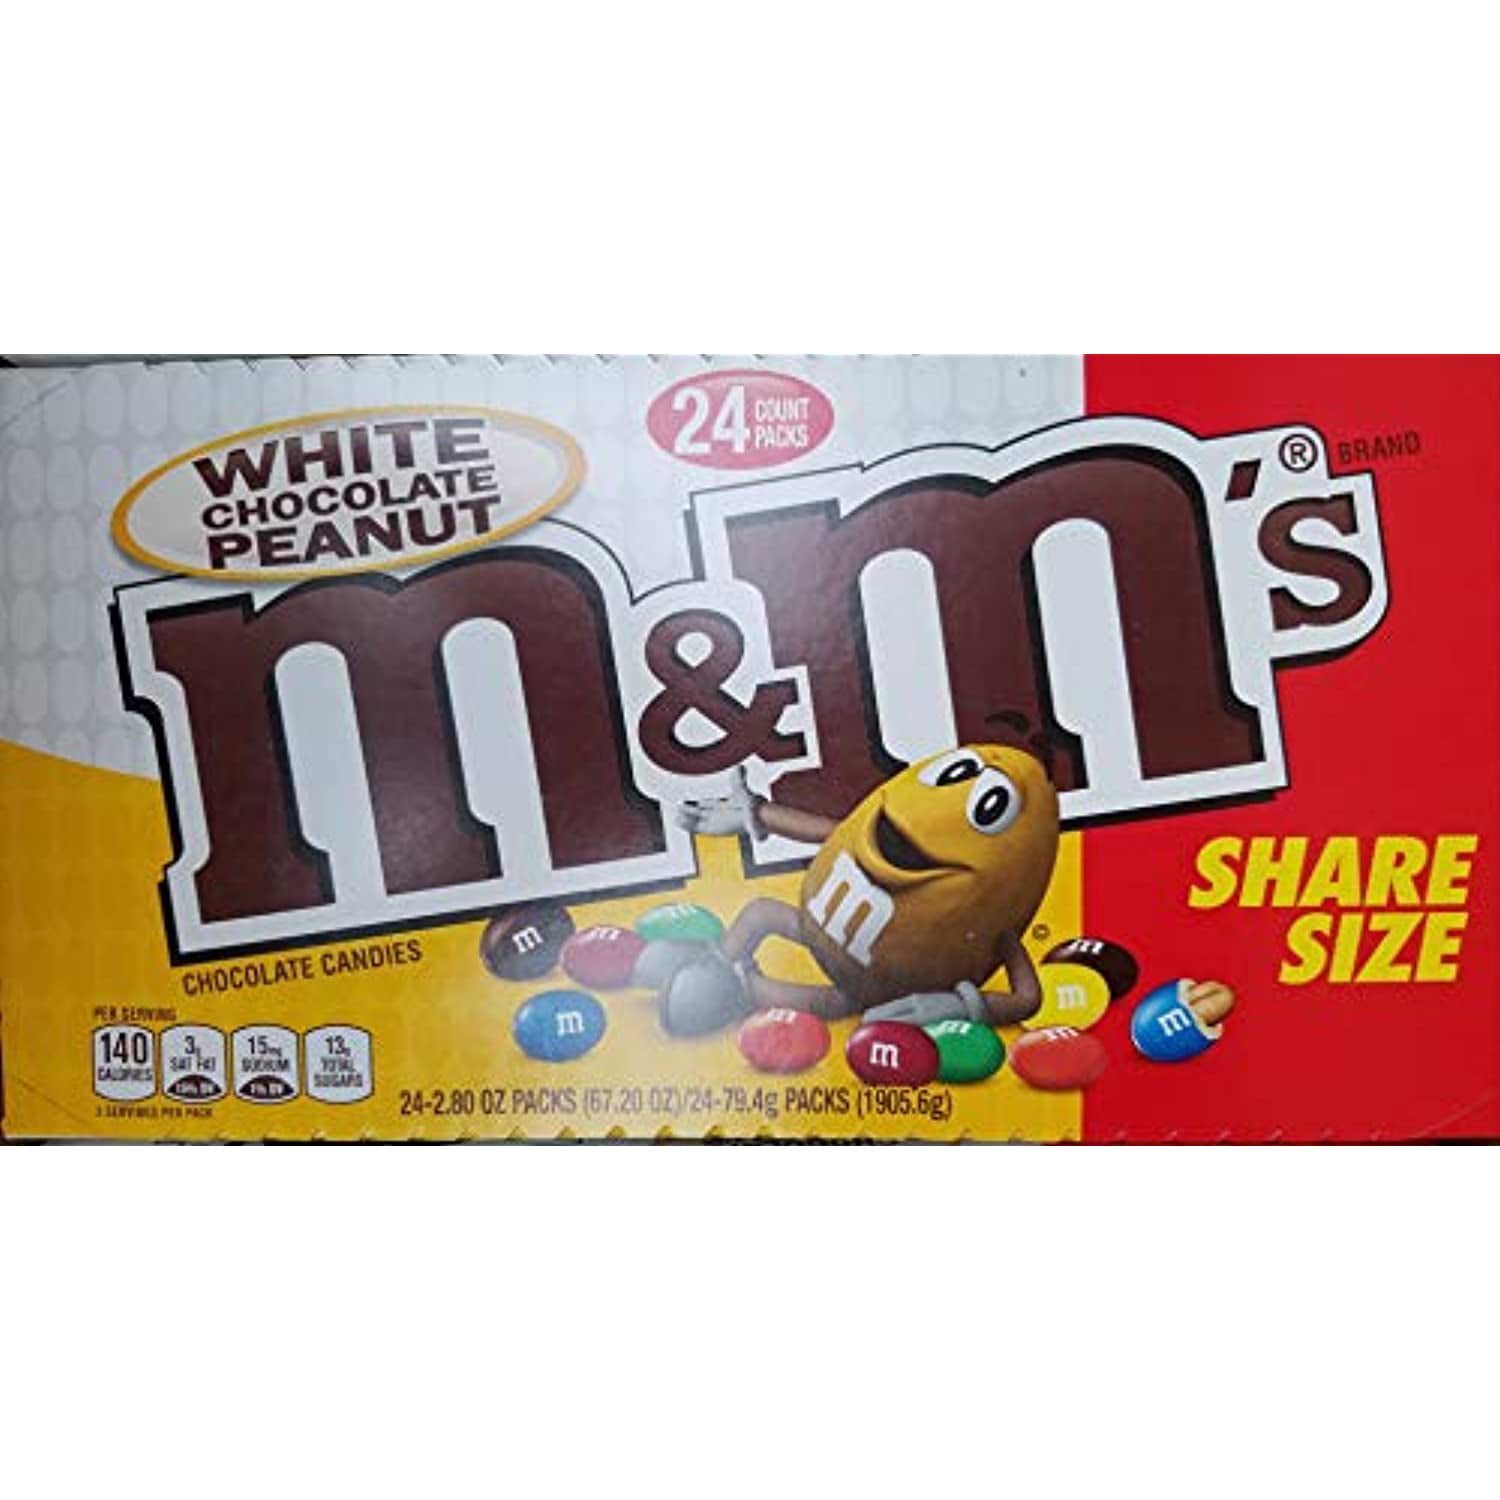 m&m's White Chocolate Share Size 2.47 OZ - Convenience Store